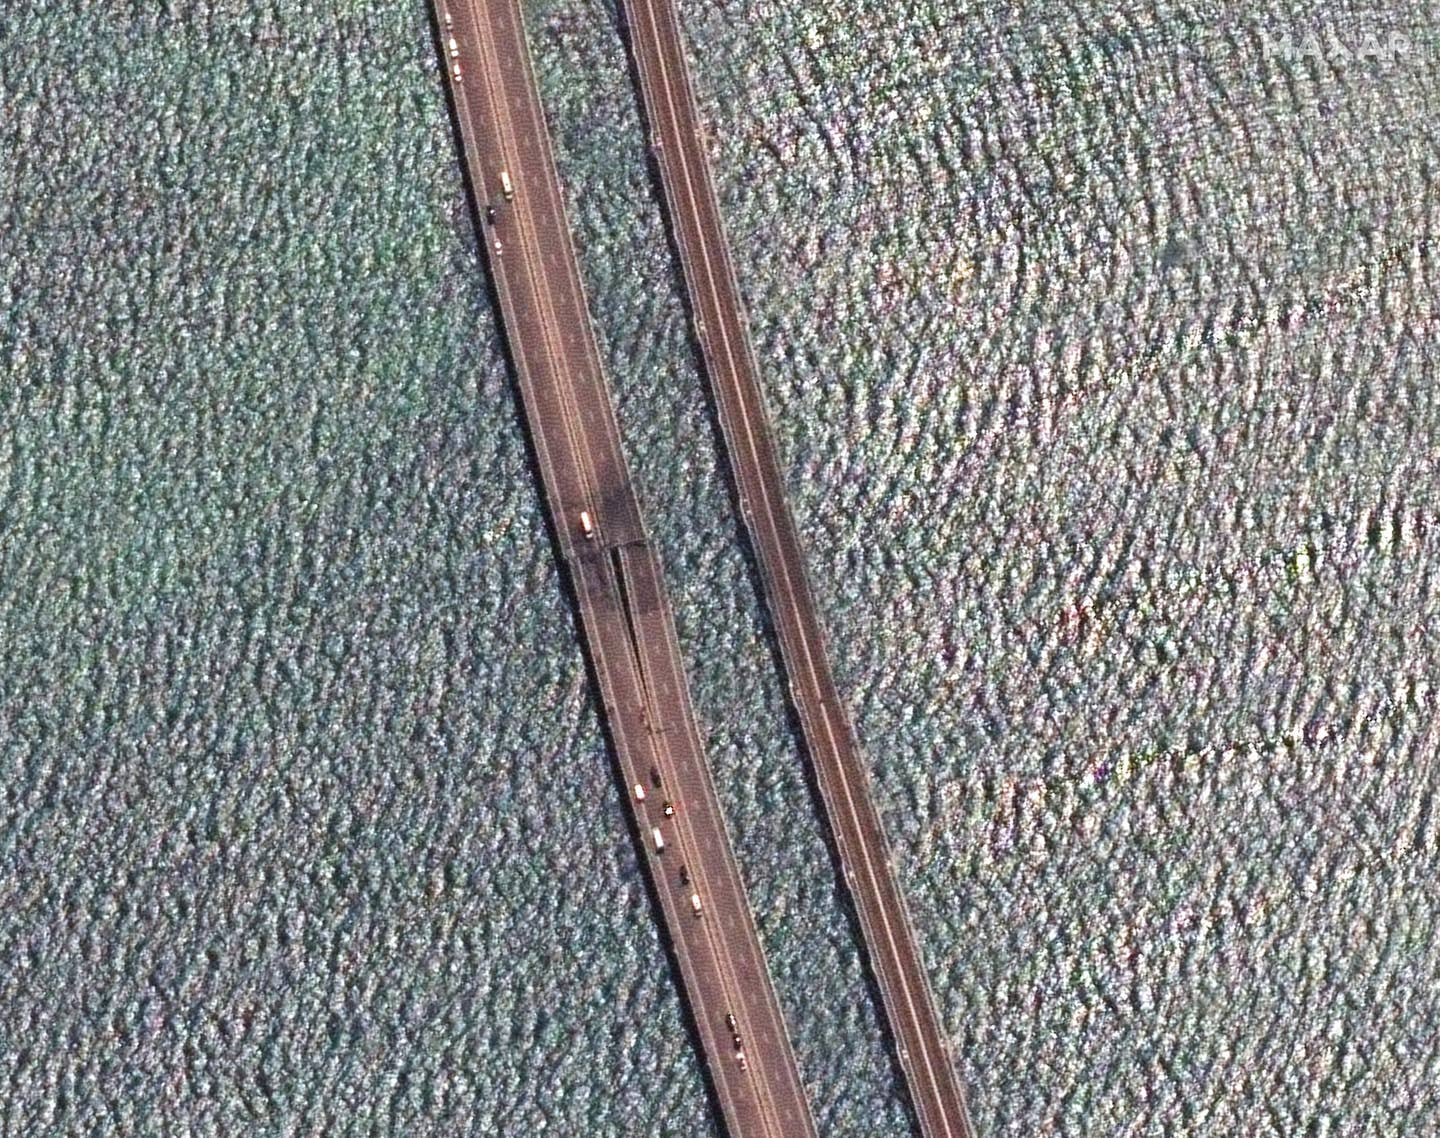 A close-up satellite image of the Kerch Bridge, damaged by a Ukrainian uncrewed surface vessel July 17. The rotated image shows the north span of the bridge on the left. (Satellite image ©2023 Maxar Technologies)